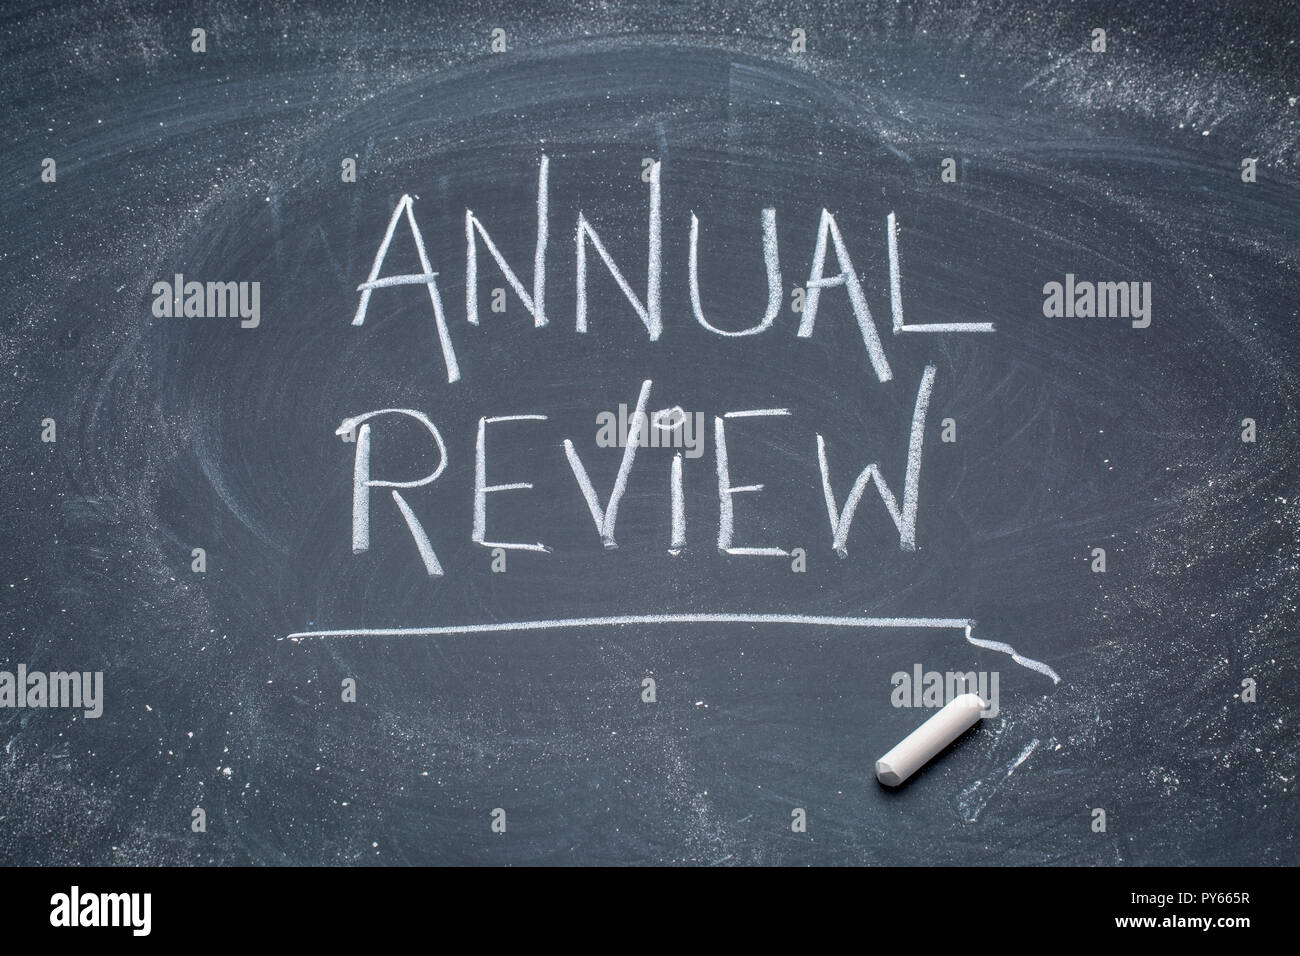 Annual review sign - white chalk messy handwriting on a blackboard Stock Photo